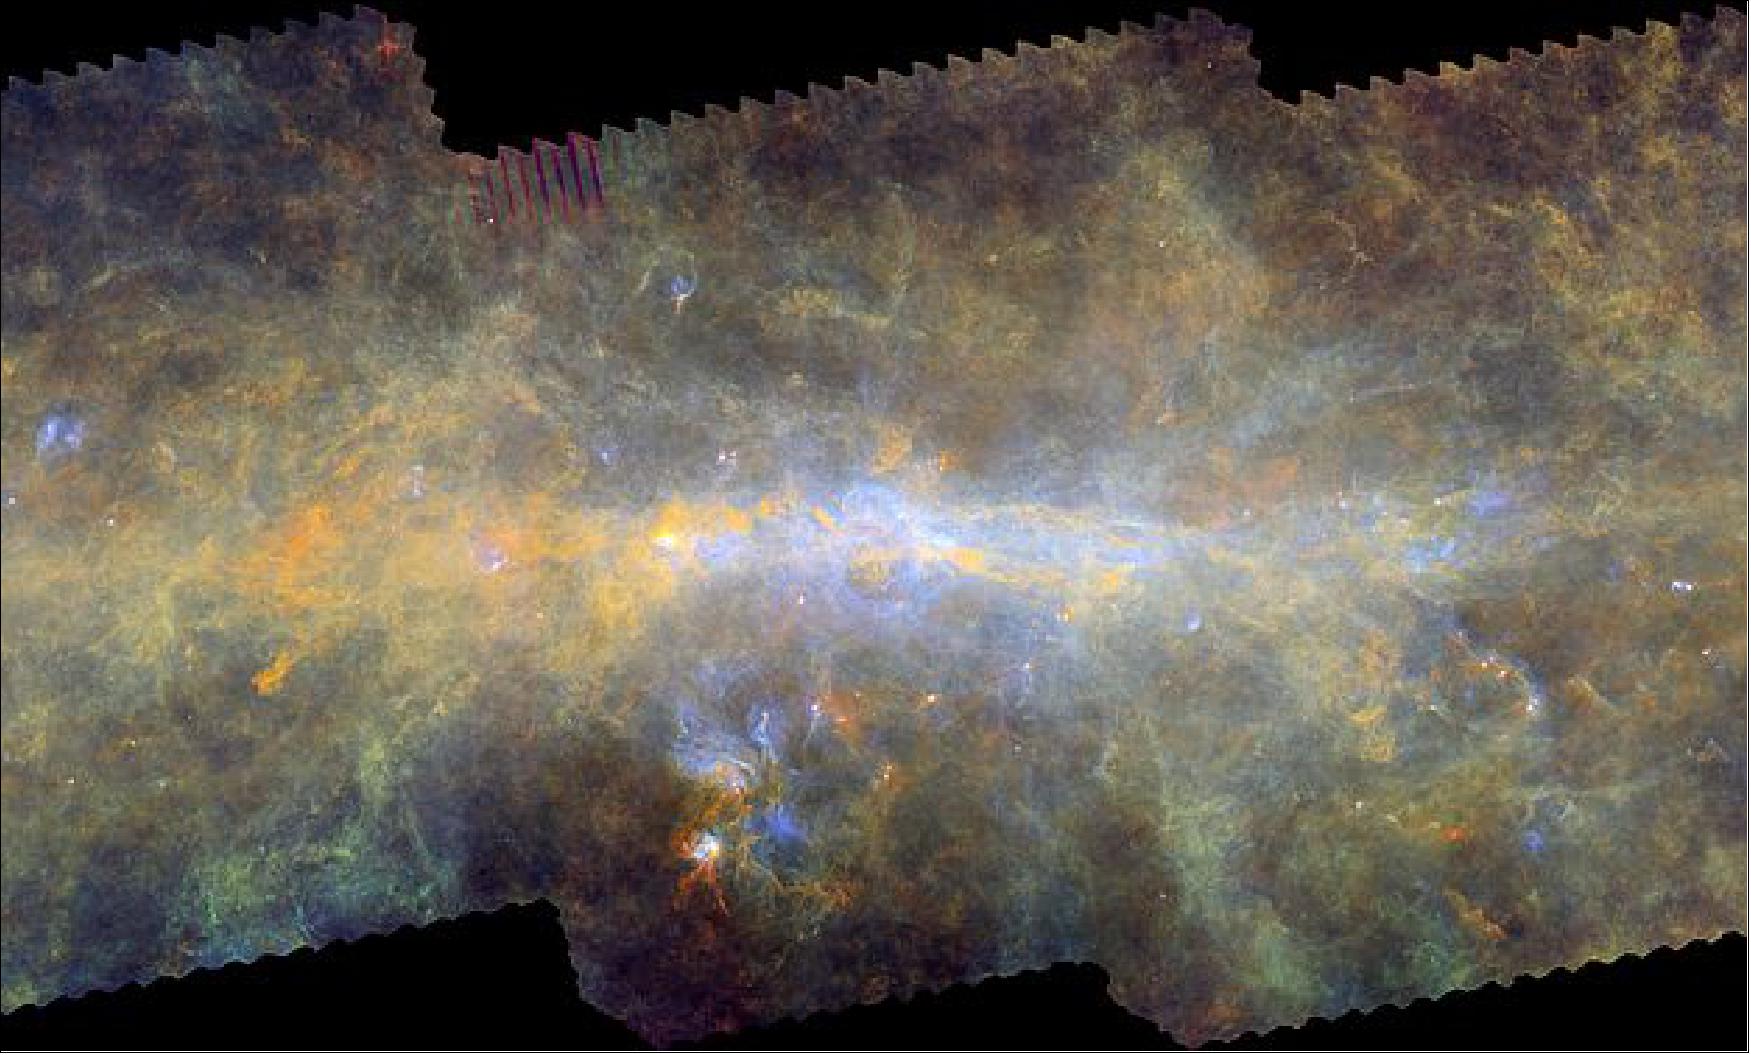 Figure 43: The center of our Galaxy, the Milky Way, about 25 000 light-years away, as seen seen by ESA's HSO. Clouds of gas and dust appear distributed along a giant, twisted ring, over 600 light-years wide, which encompasses the supermassive black hole sitting at the Galaxy's core. The image is a composite of the wavelengths of 70 µm (blue), 160 µm (green) and 350 µm (red), image credit: ESA/Herschel/PACS, SPIRE/Hi-GAL Project, G. Li Causi, IAPS/INAF, Italy